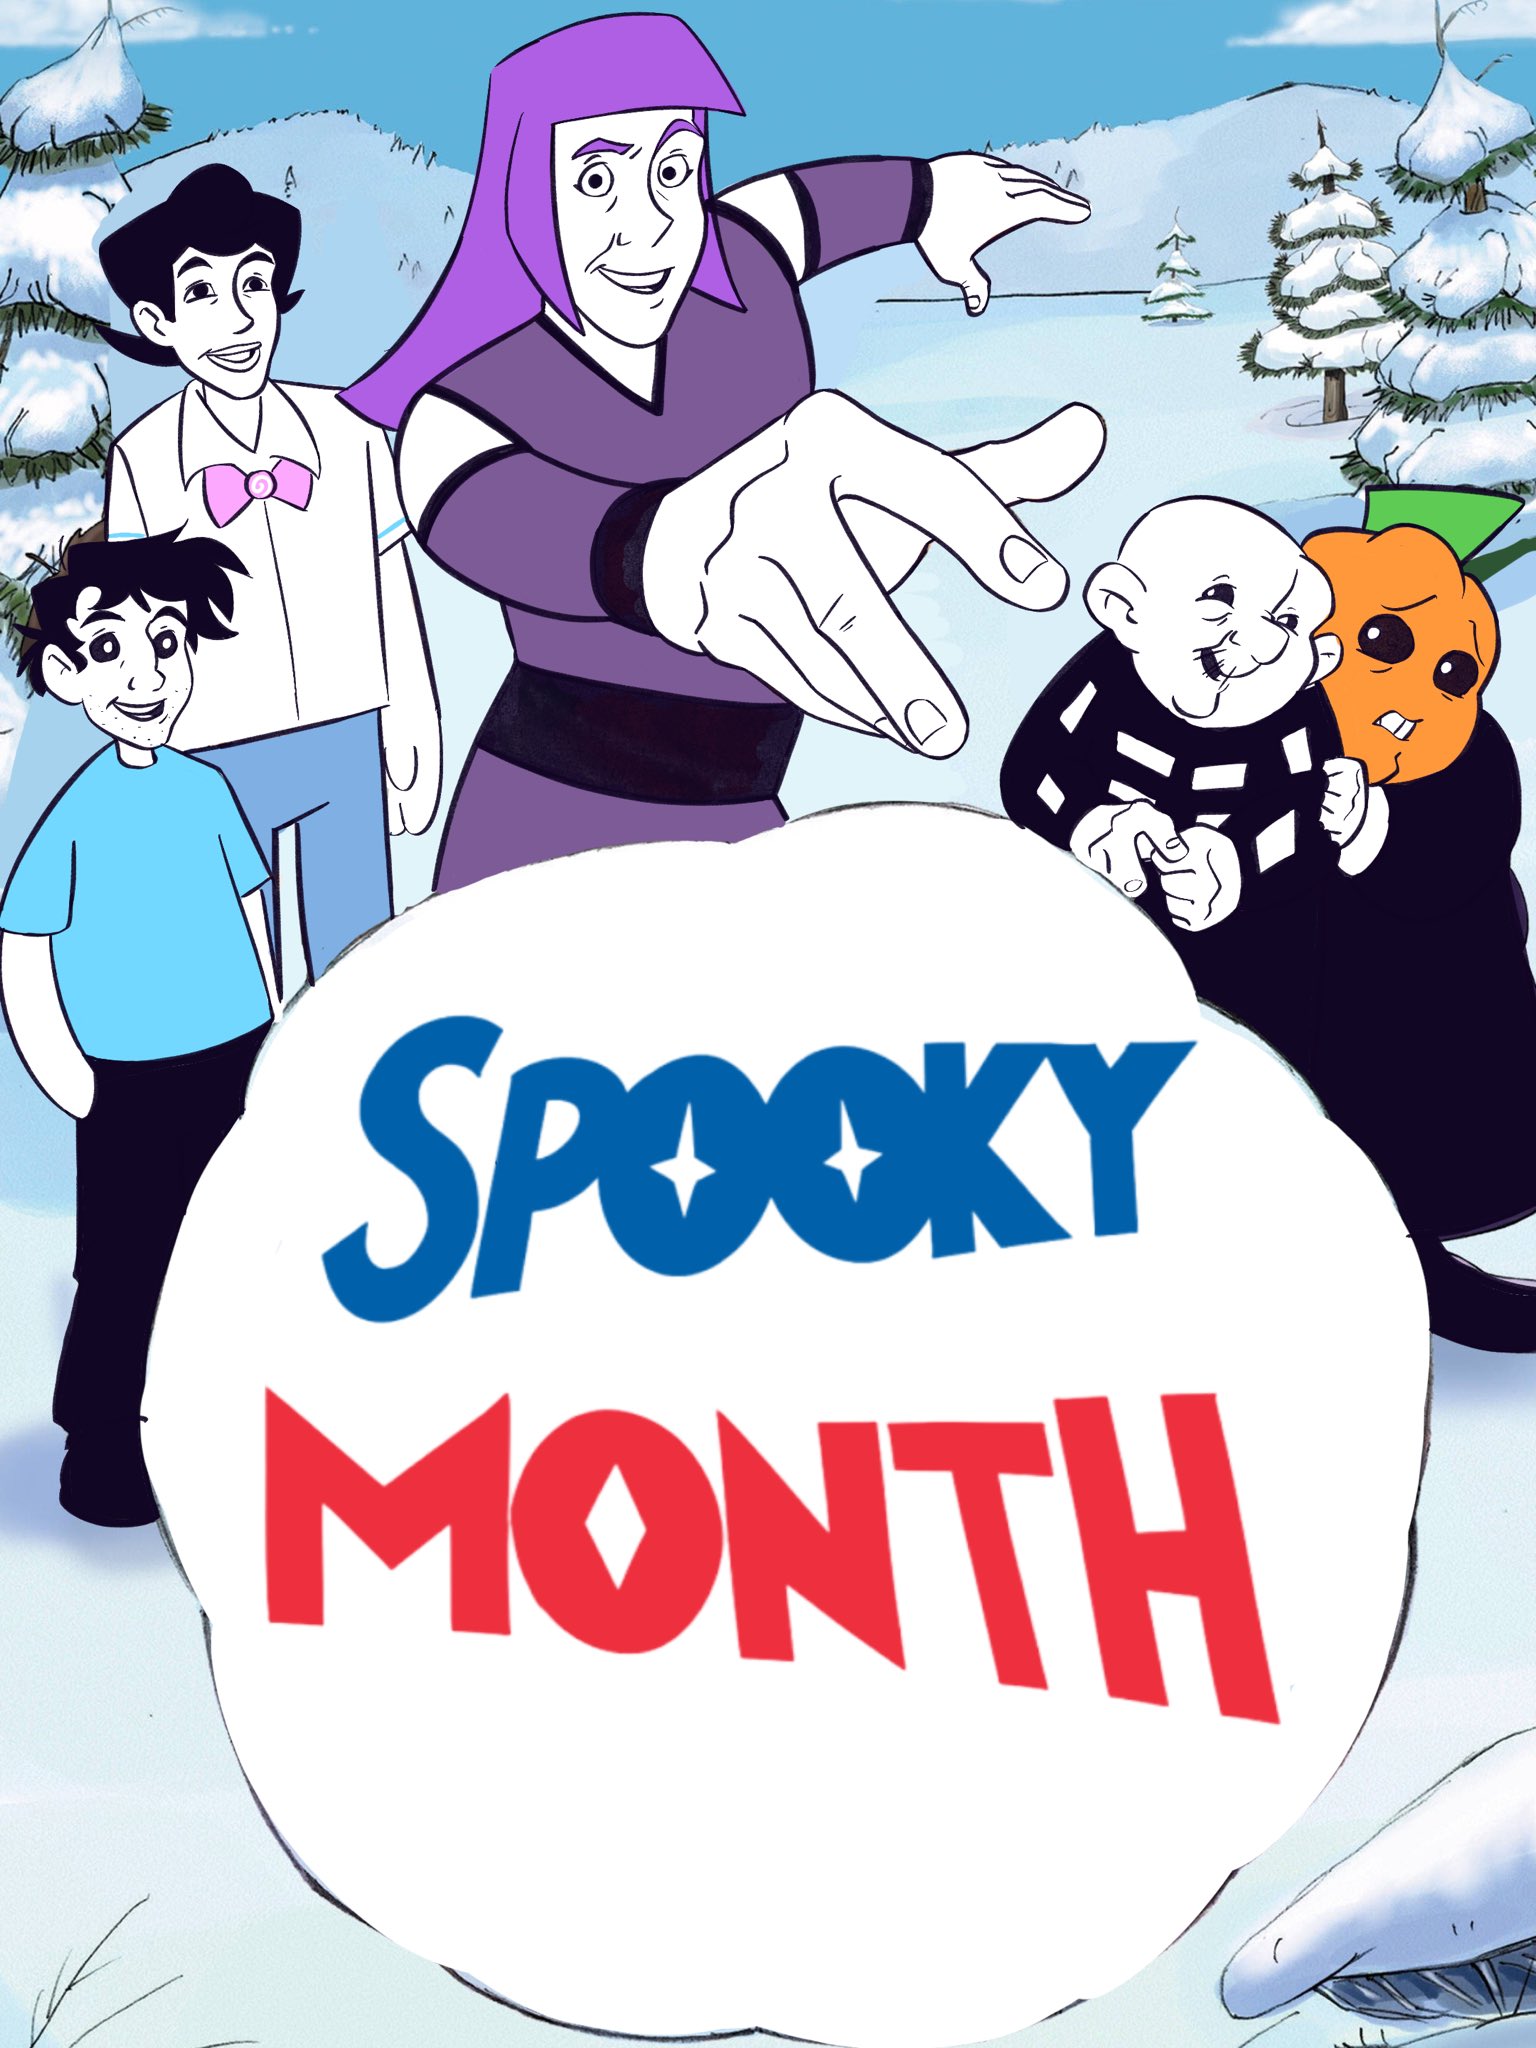 Req on X: Episode 6 spooky month poster released early